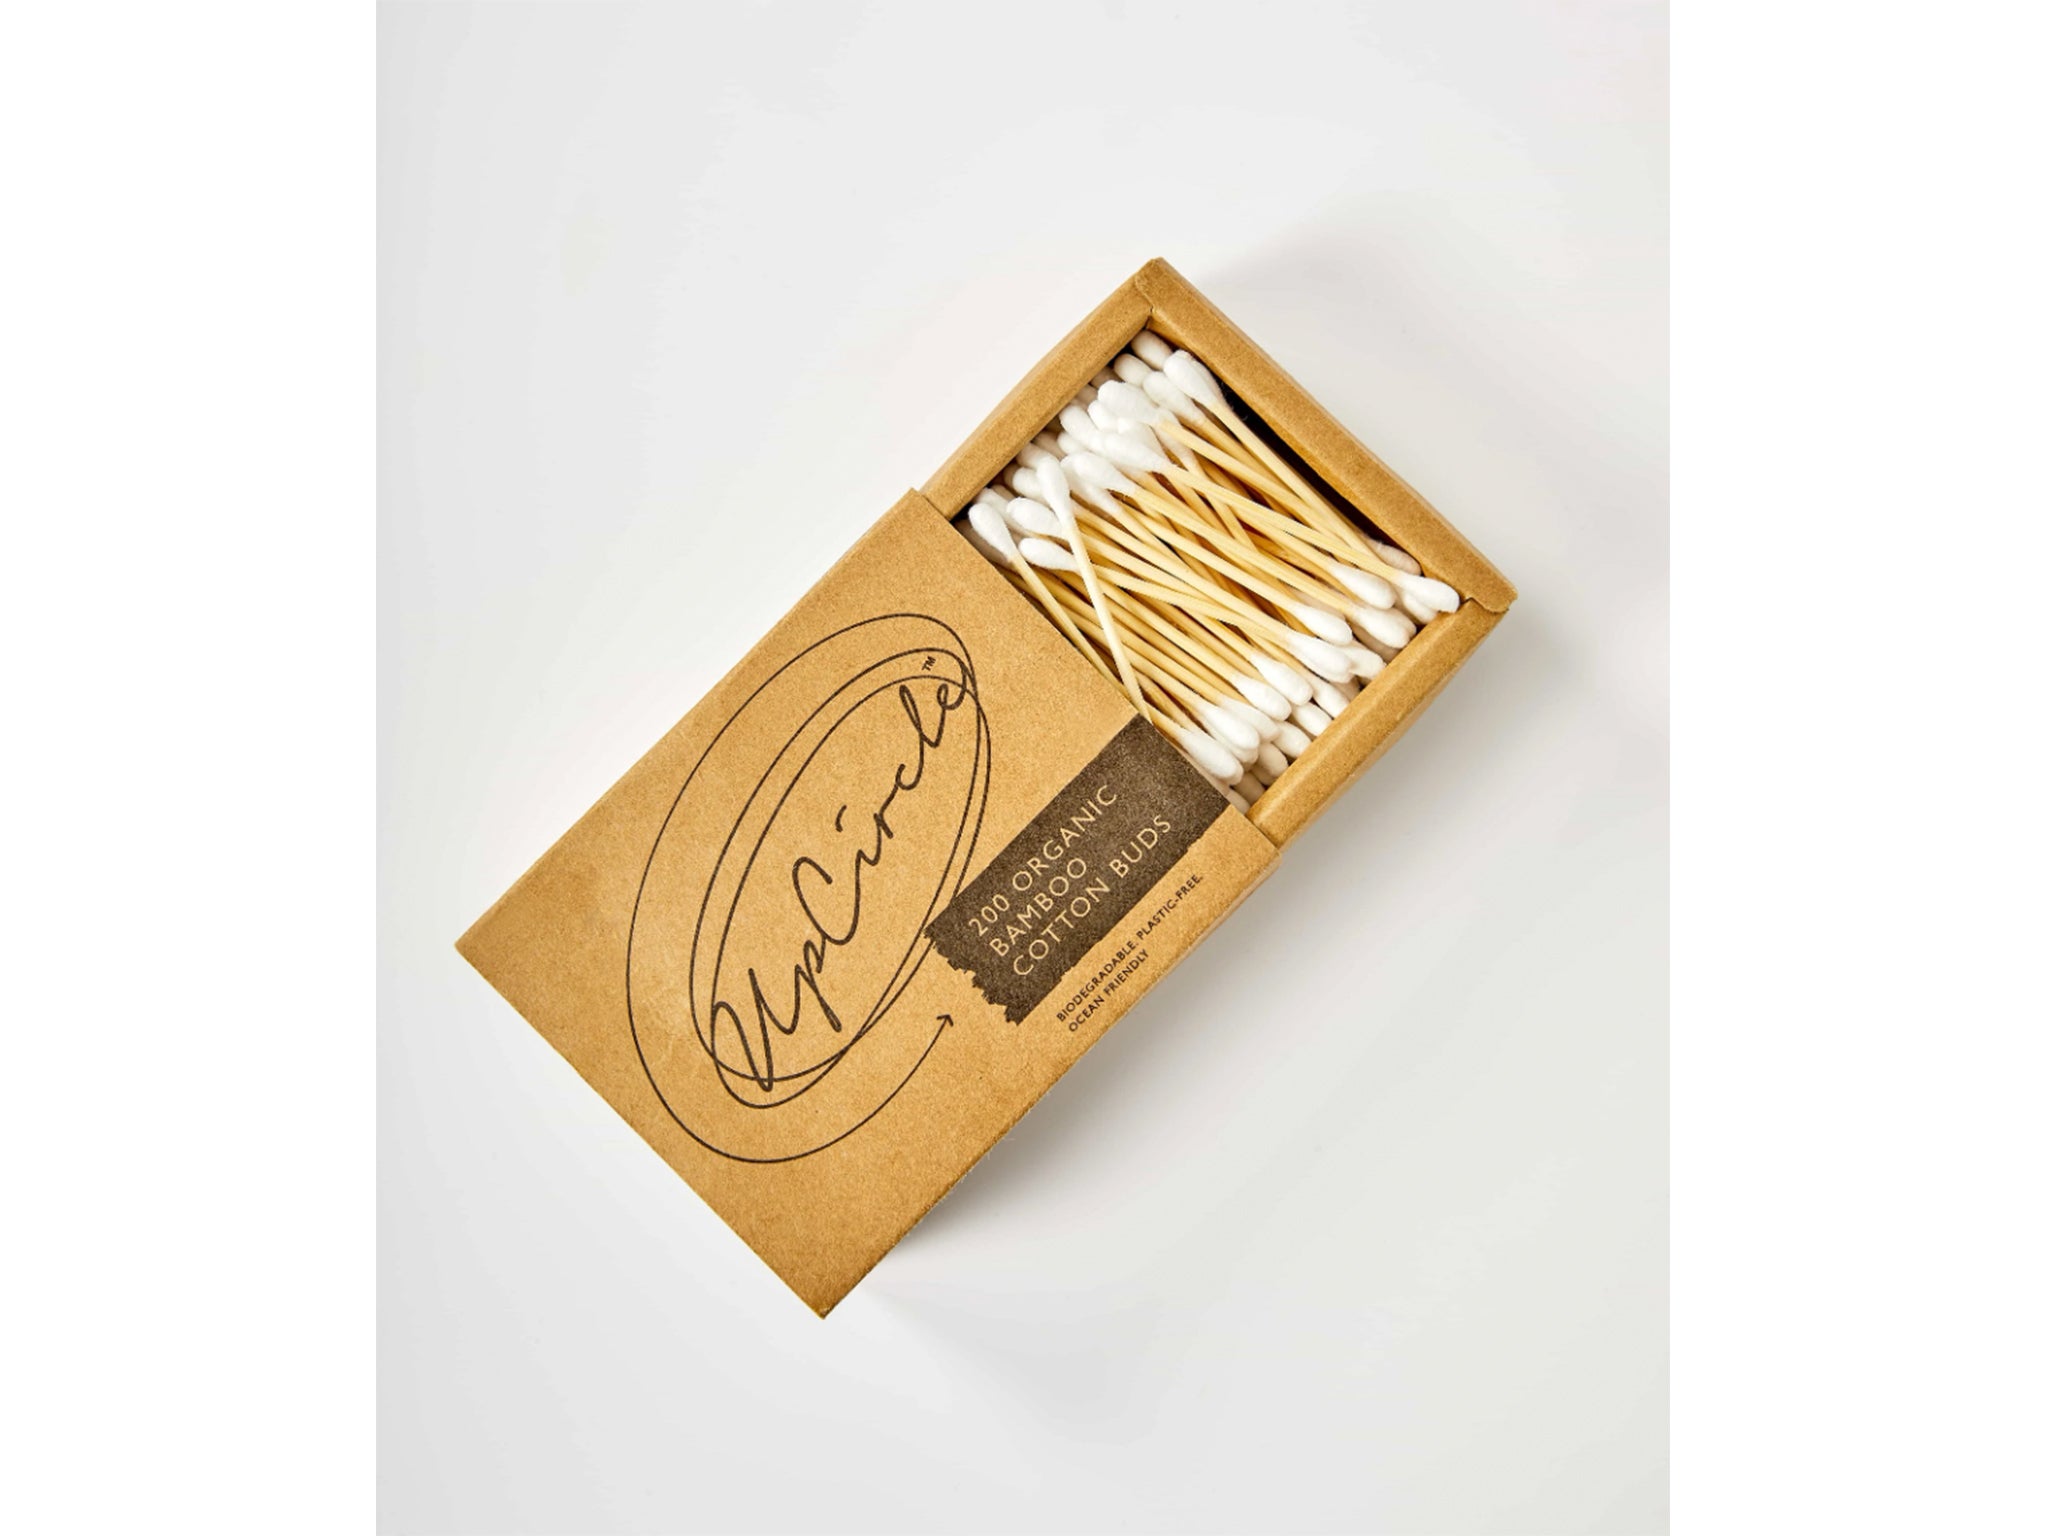 For quick touch-ups, reach for this box of cotton buds